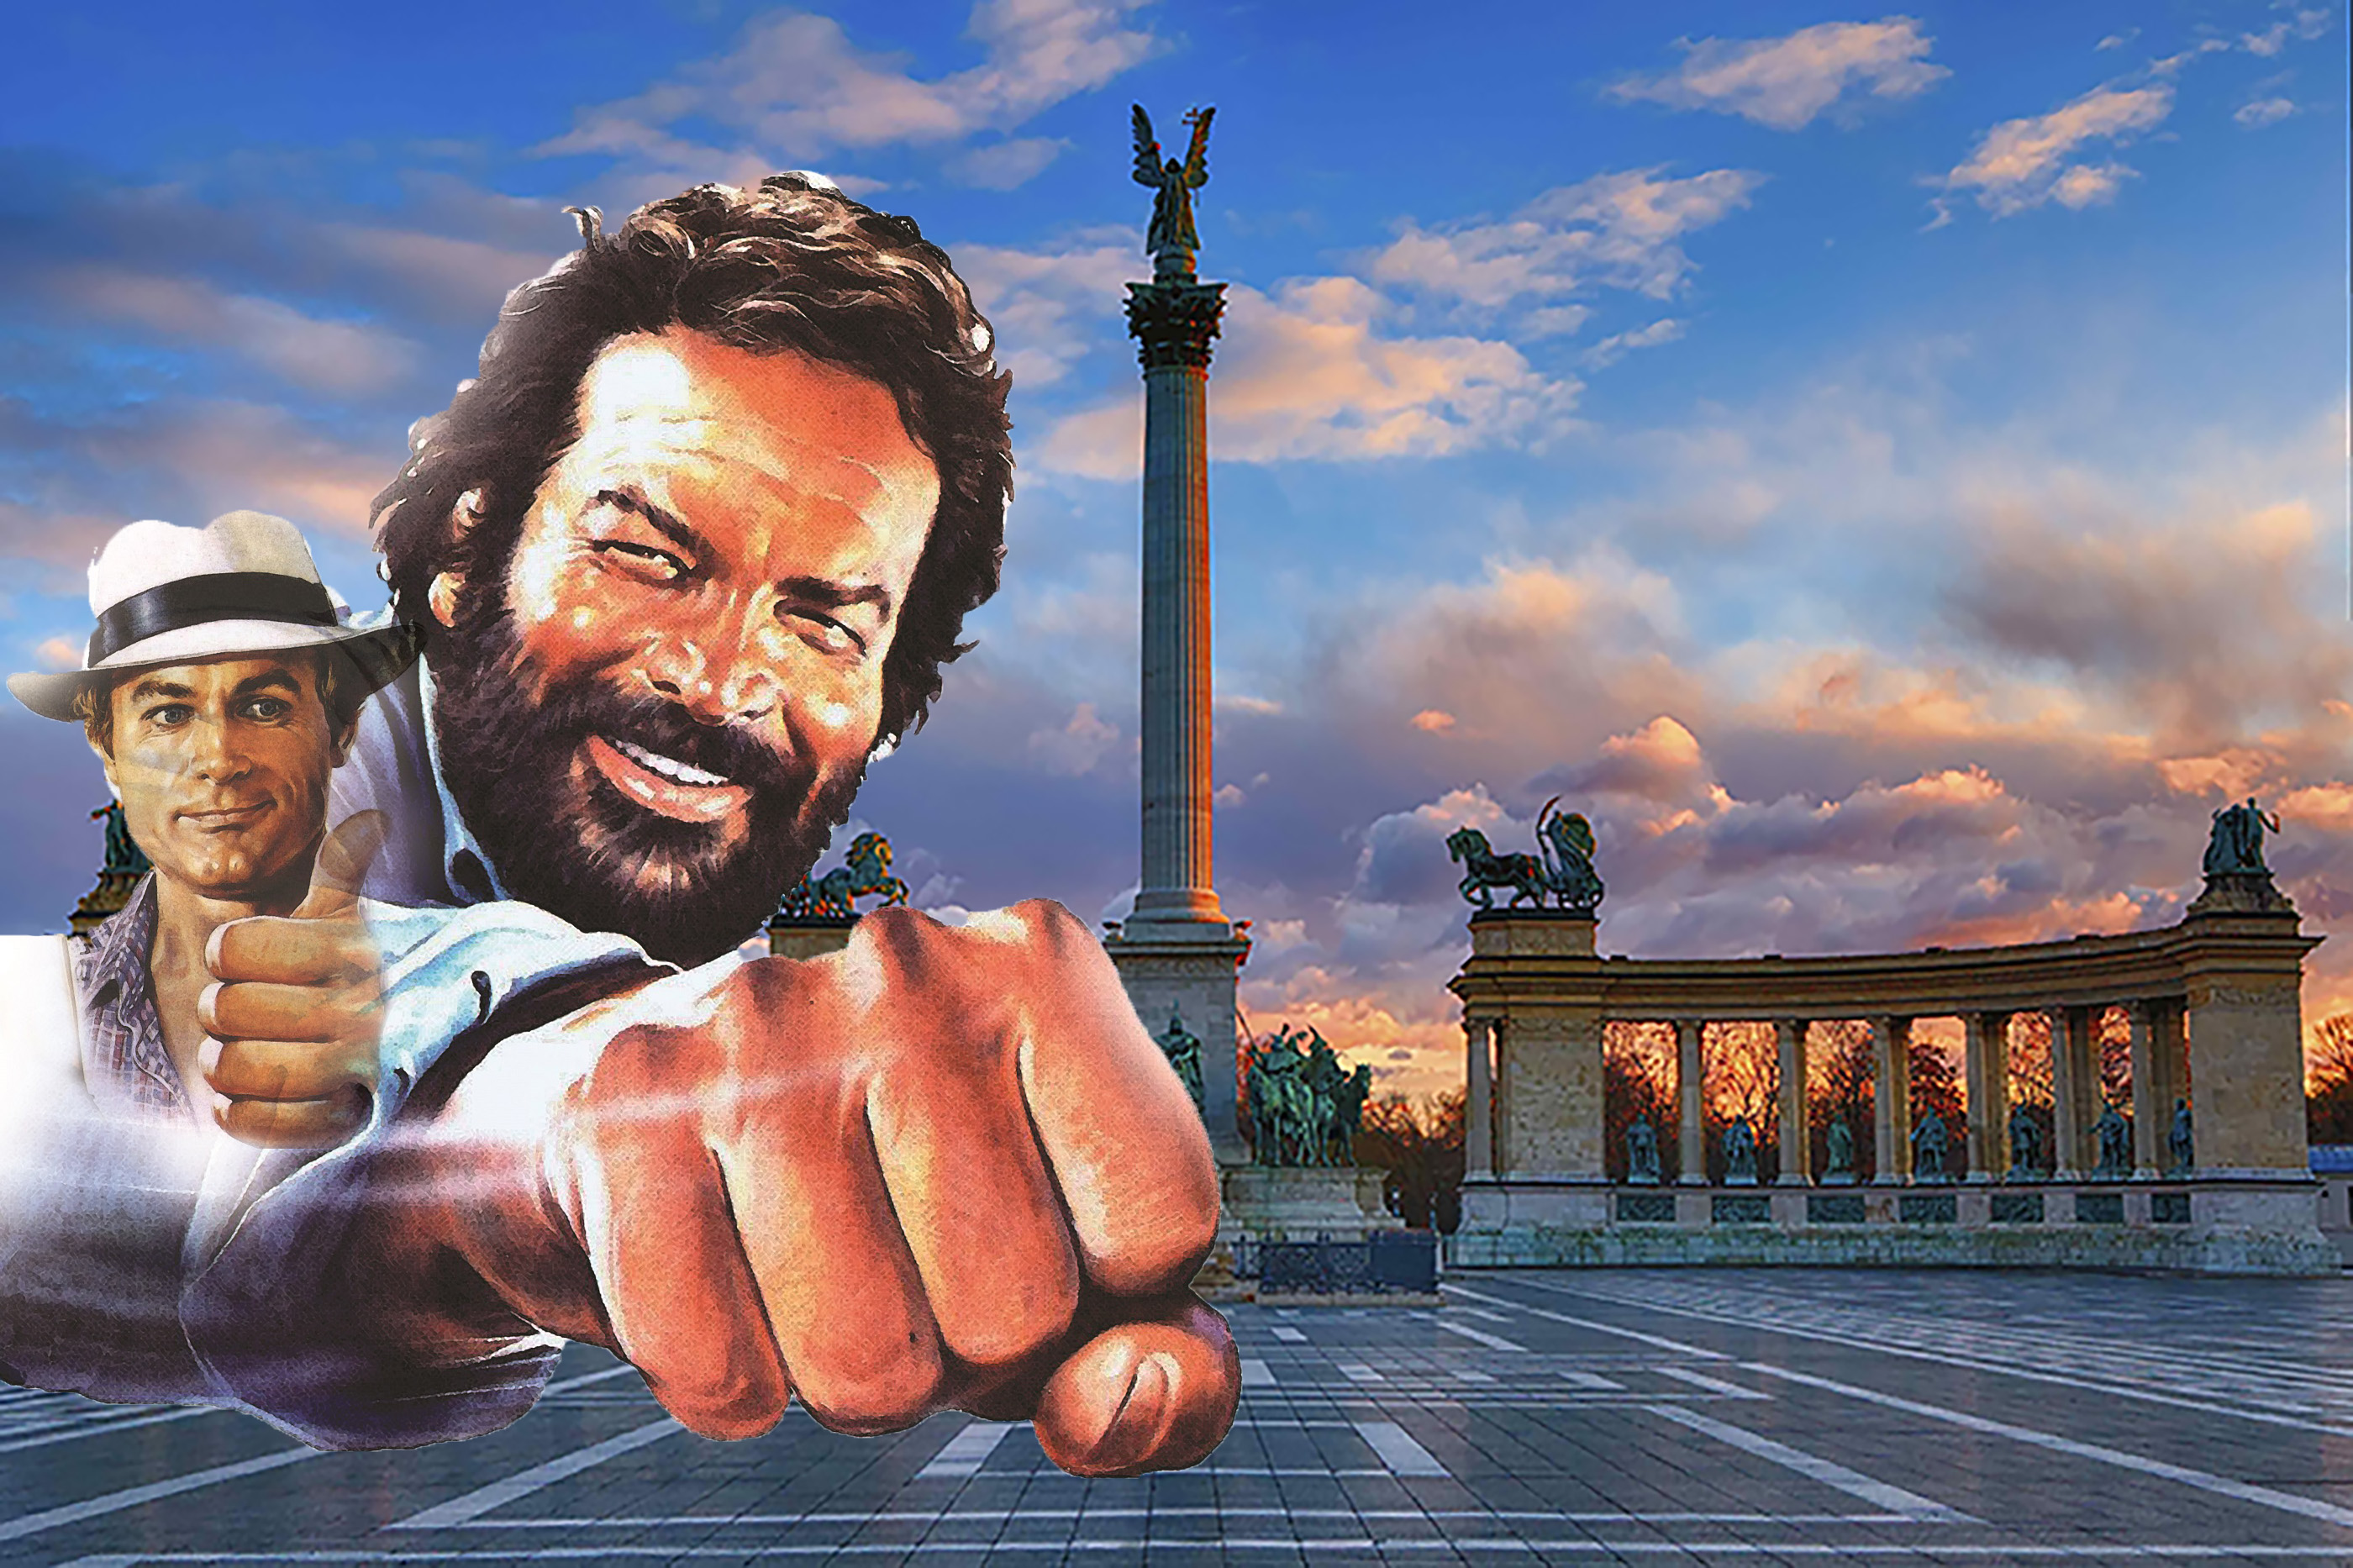 https://welovebudapest.com/i/a2/why-are-bud-spencer-and-terence-hill-such-big-heroes-in-budapest.jpg